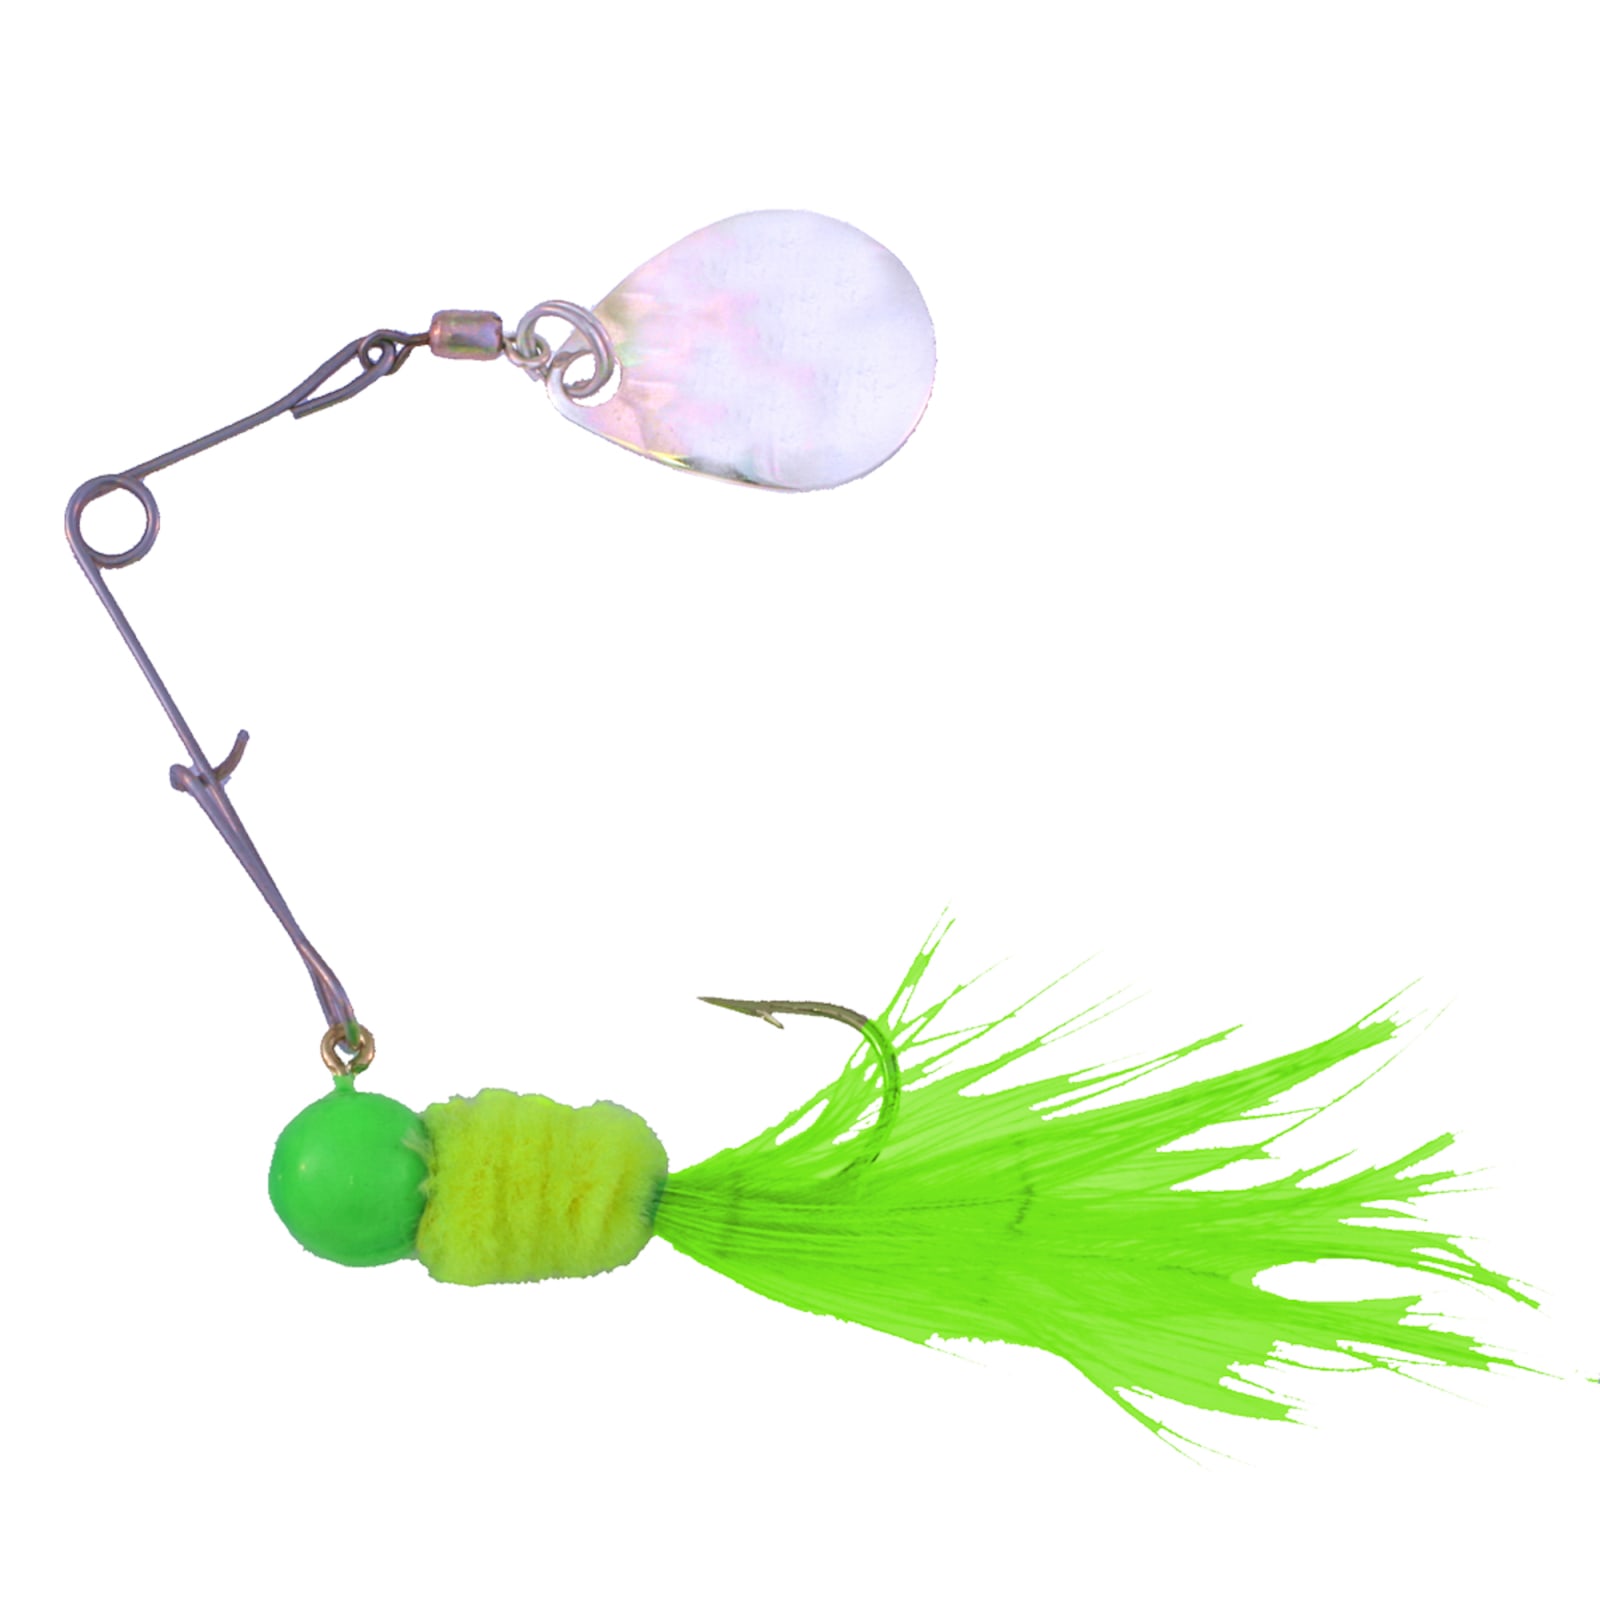 Lime Chartreuse Spin Caller Spinner Lure by Team Crappie at Fleet Farm